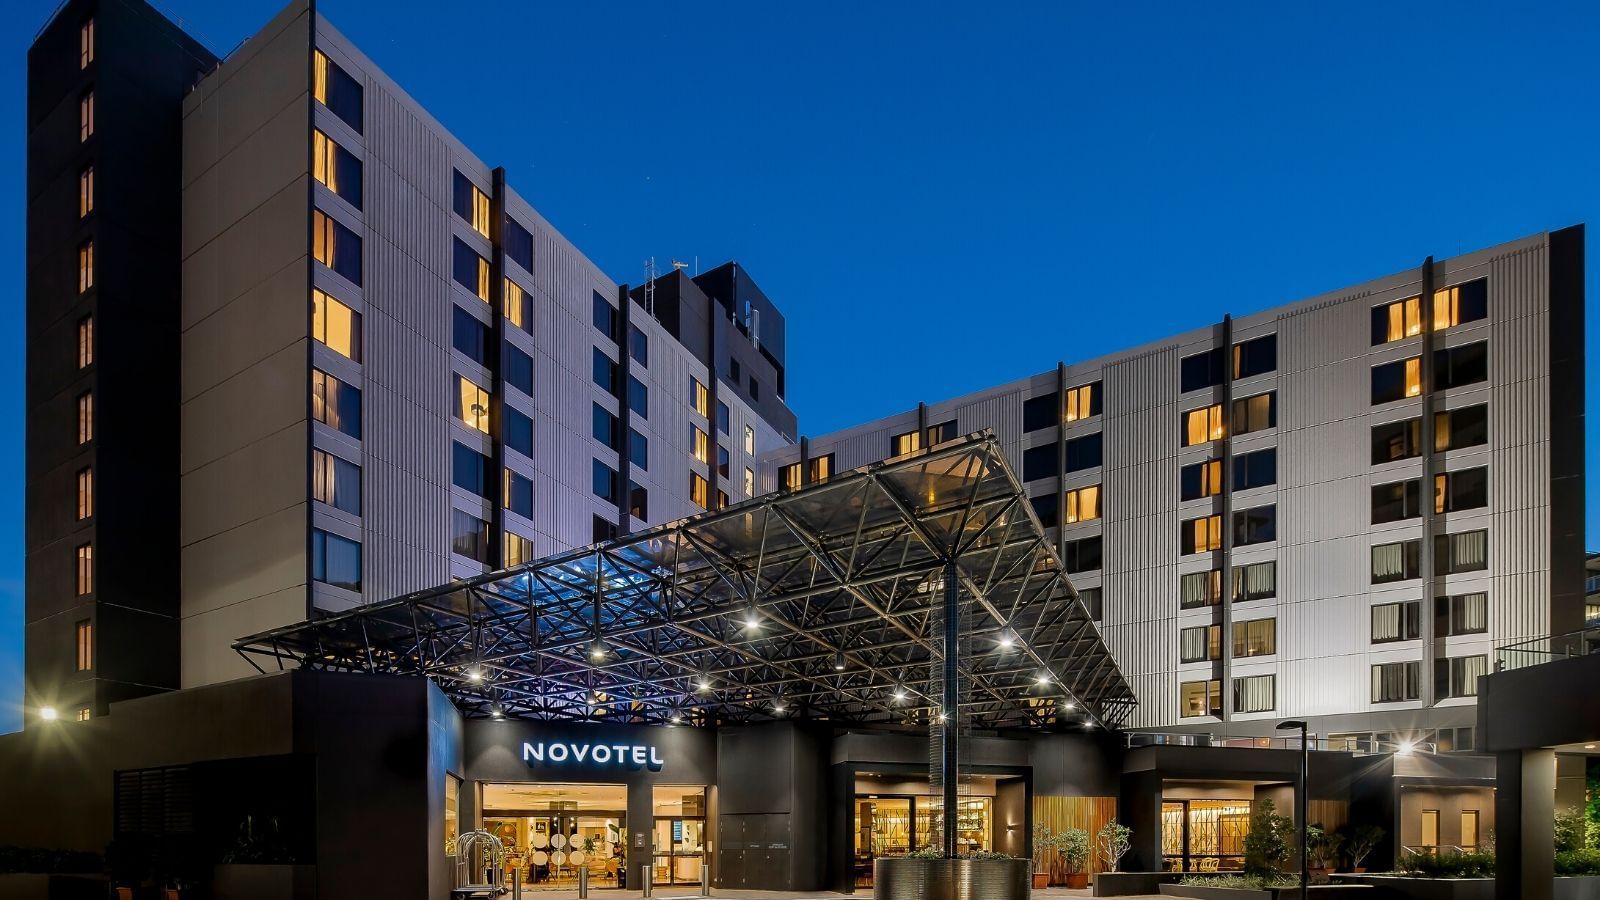 Entrance to the Hotel at Novotel Sydney International Airport